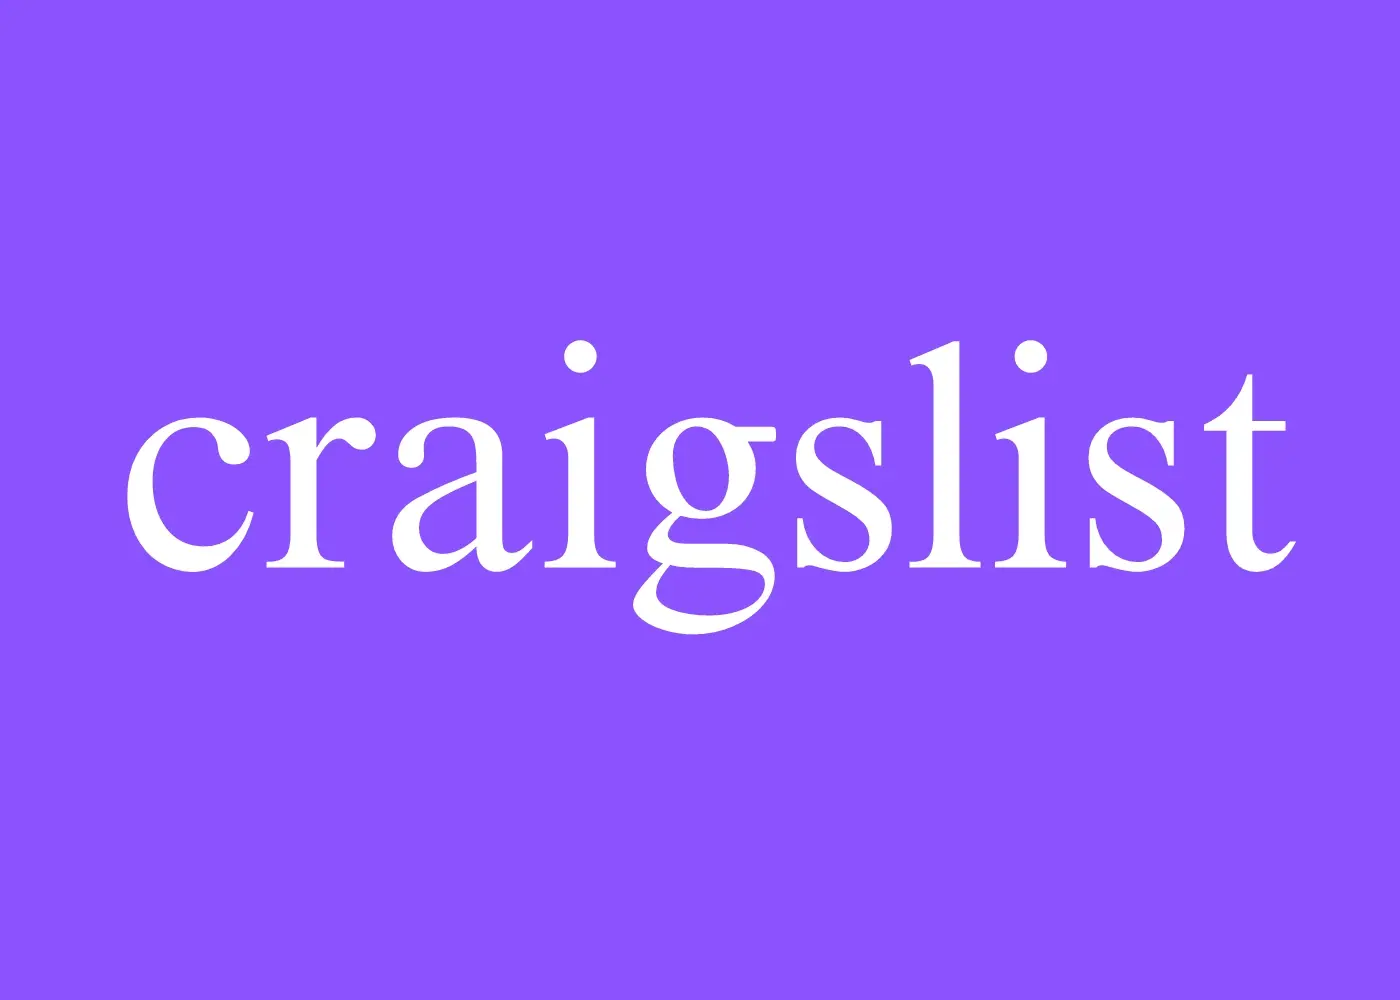 craigslist logo with a white text and purple background